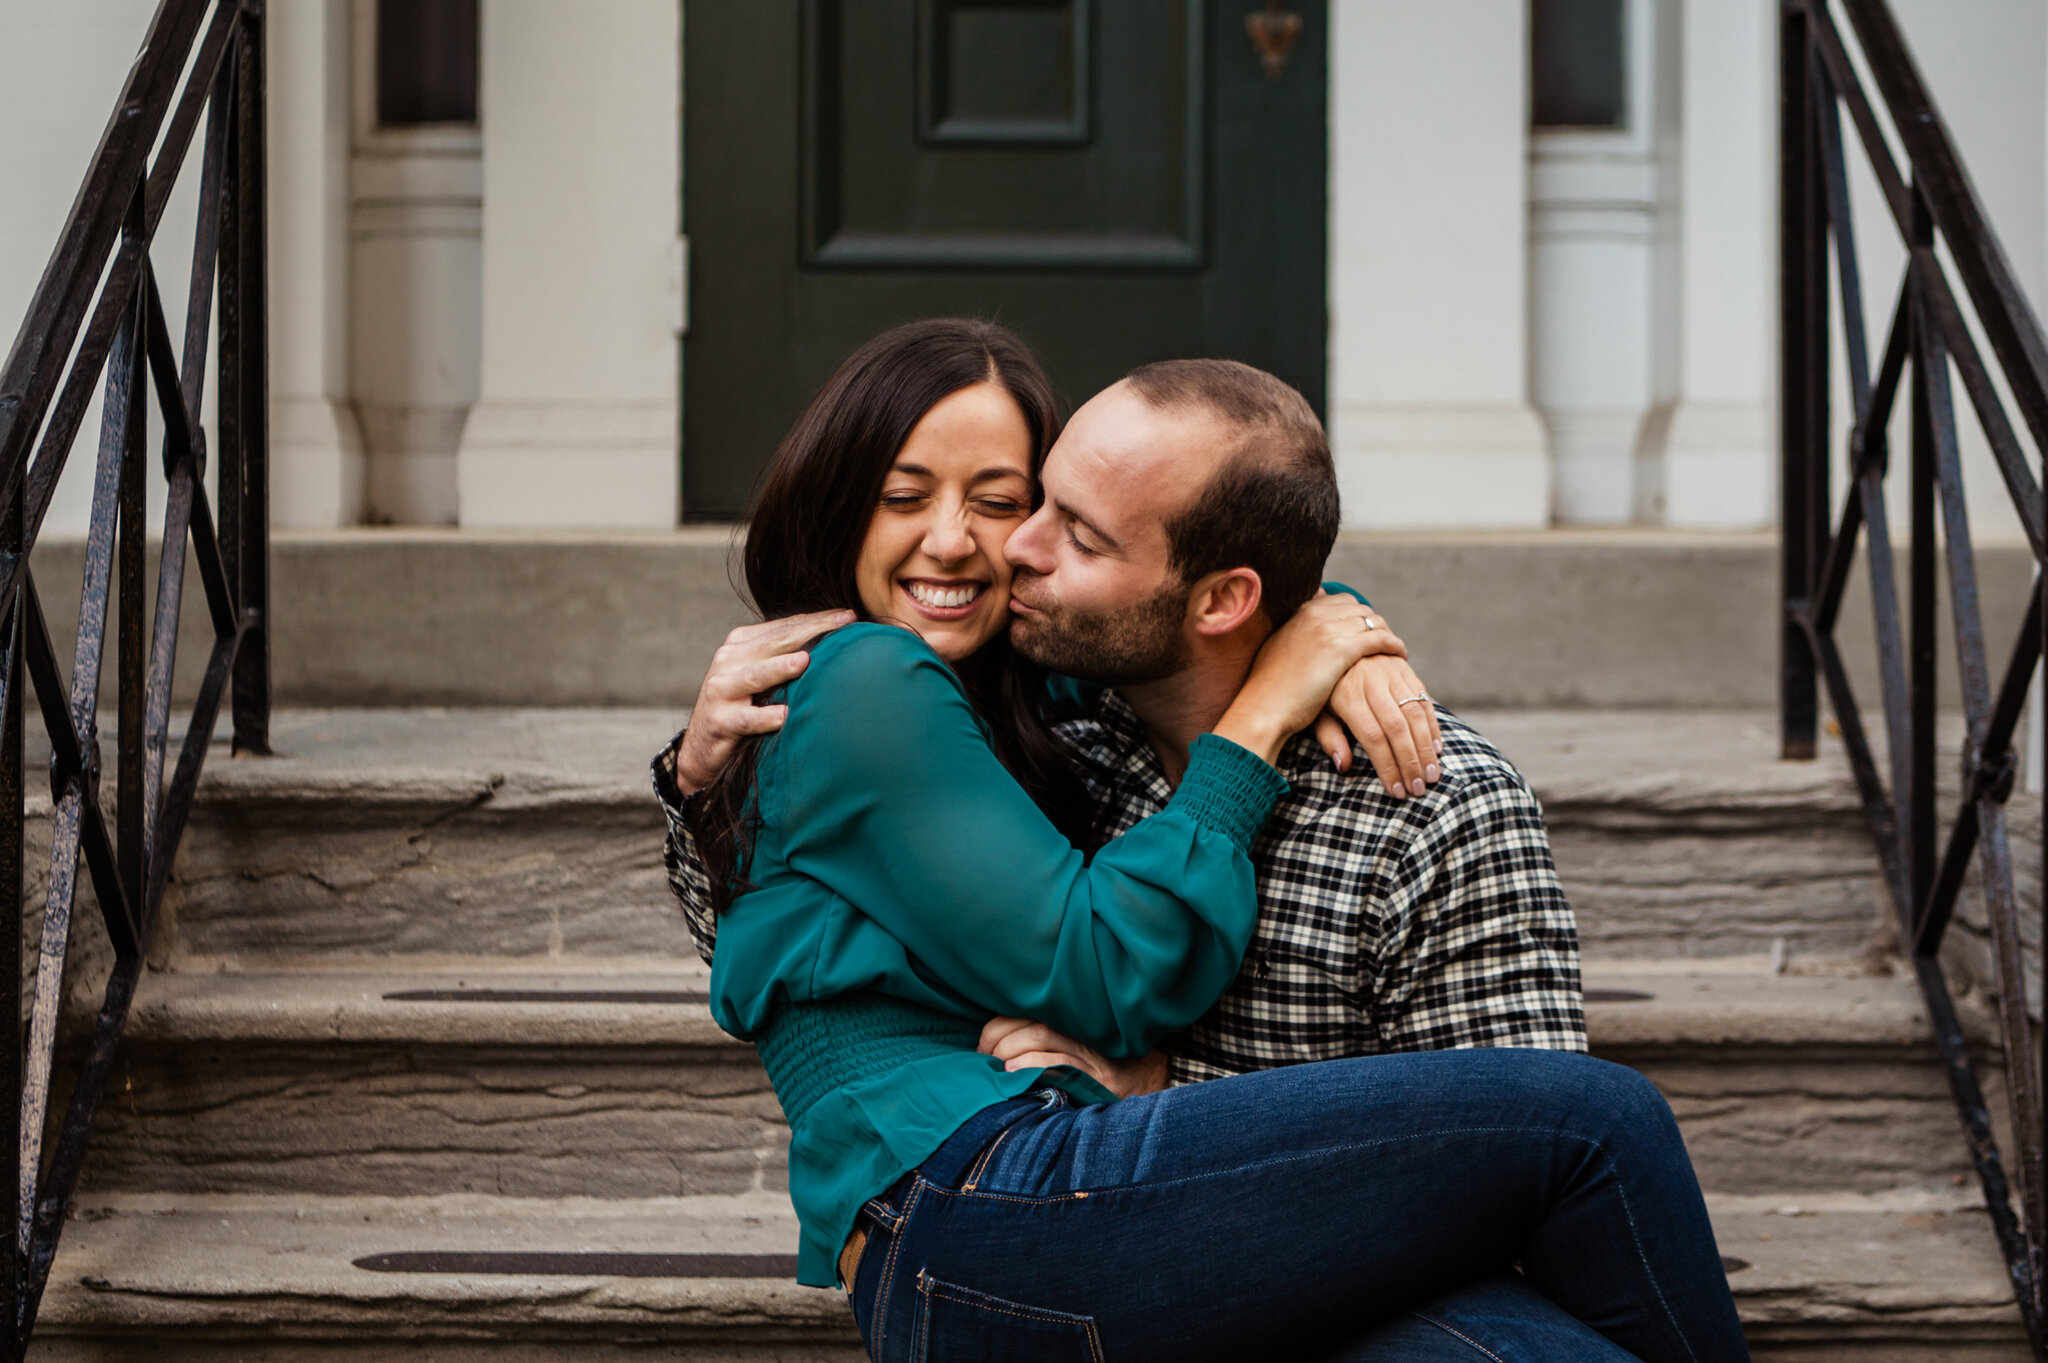 Genesee_Valley_Club_High_Falls_Rochester_Engagement_Session_JILL_STUDIO_Rochester_NY_Photographer_1257.jpg